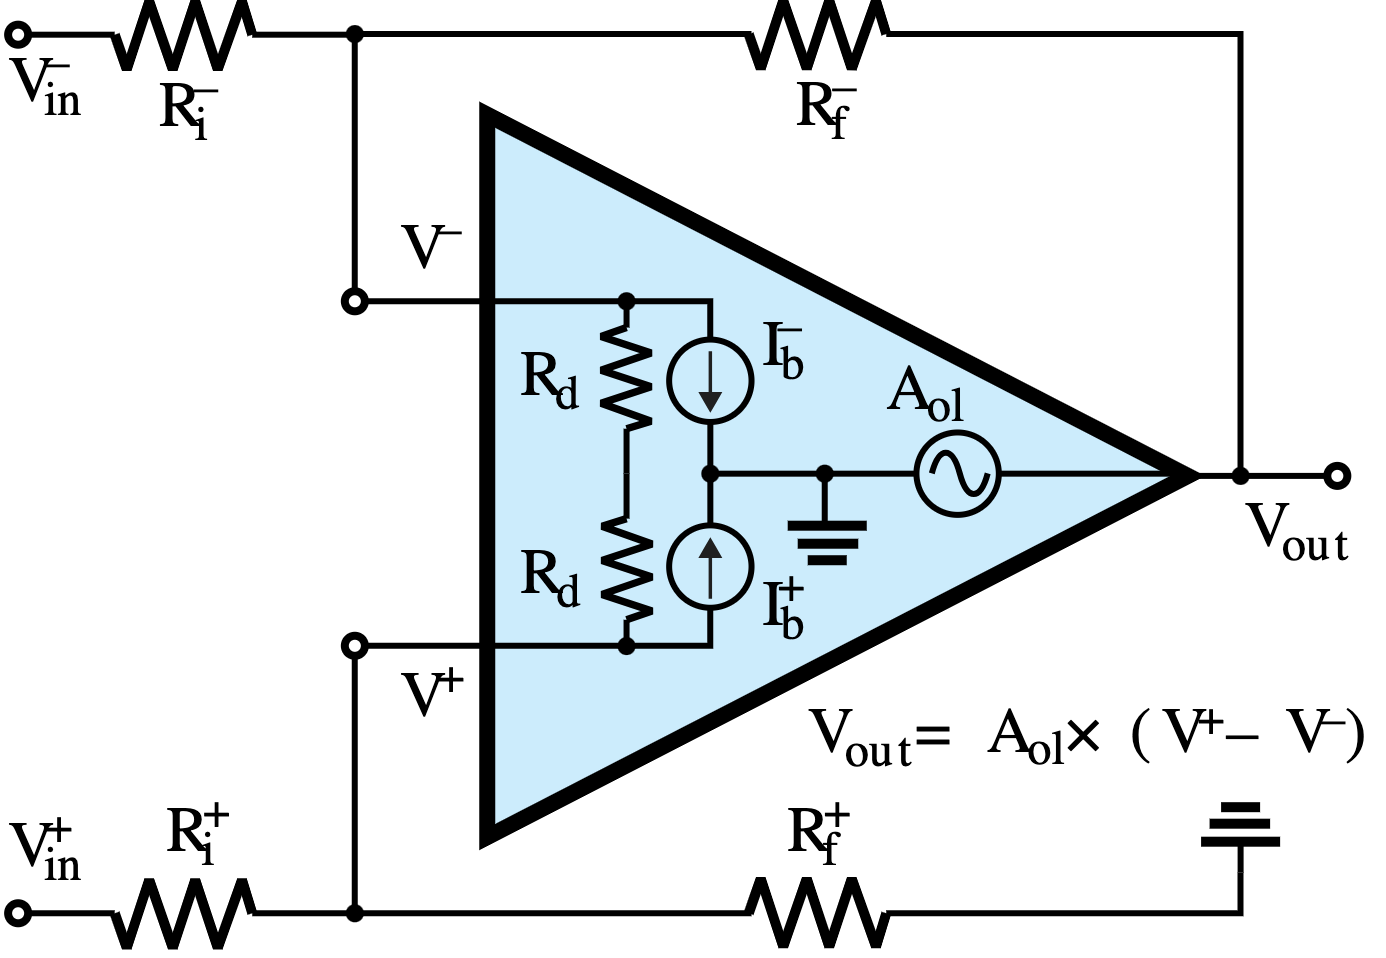 Input Impedance of Op Amp: What It Is and How to Calculate It